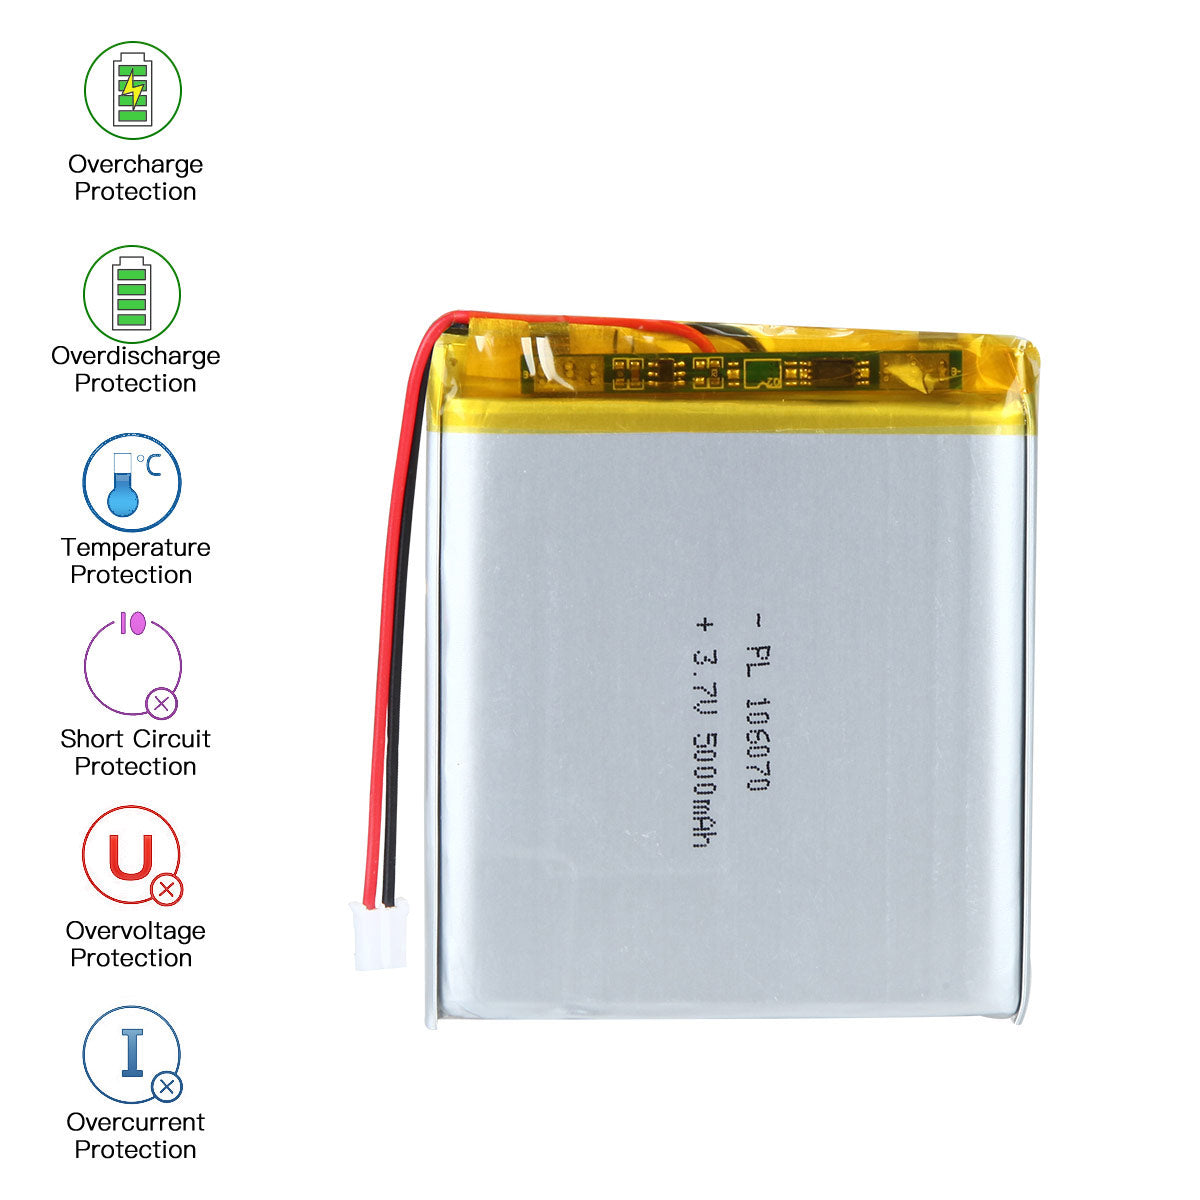 3.7V 5000mAh 106070 Rechargeable Lithium Polymer Battery